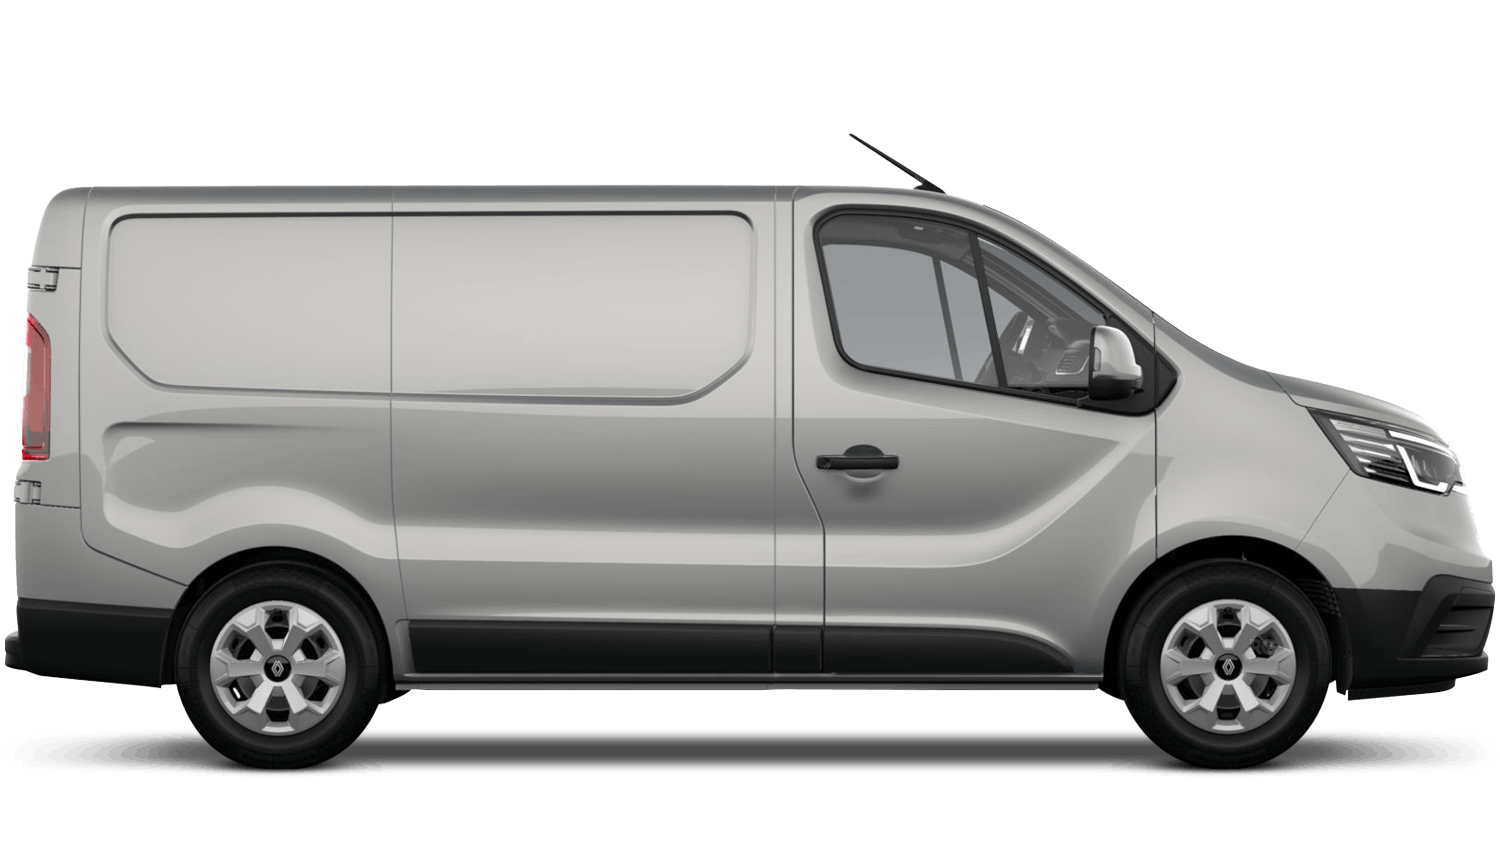 Renault Trafic Hire Purchase offer